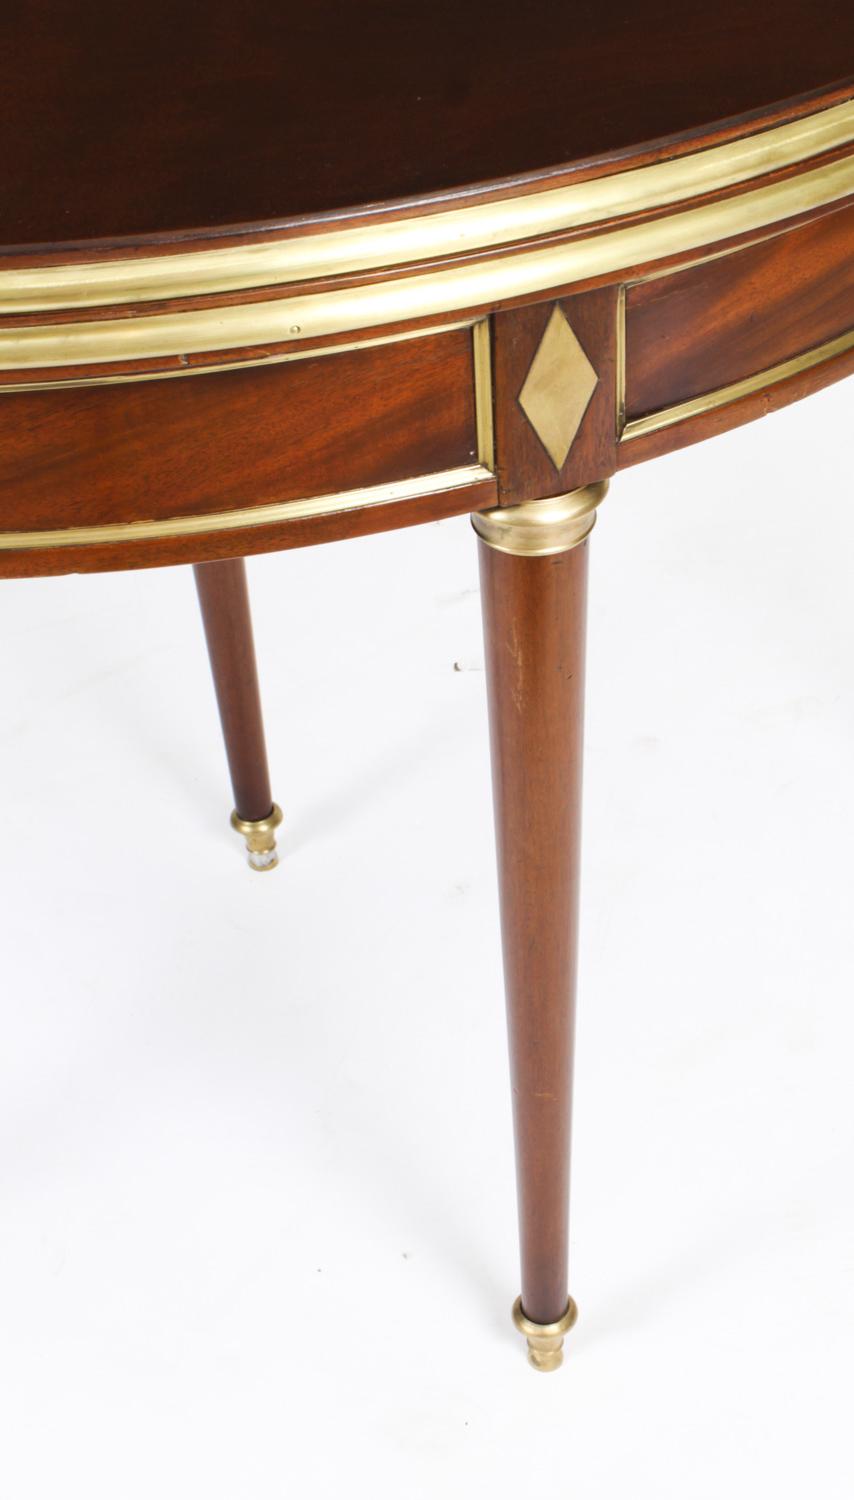 Antique French Directoire Brass Mounted Card Table Early 19th Century For Sale 7